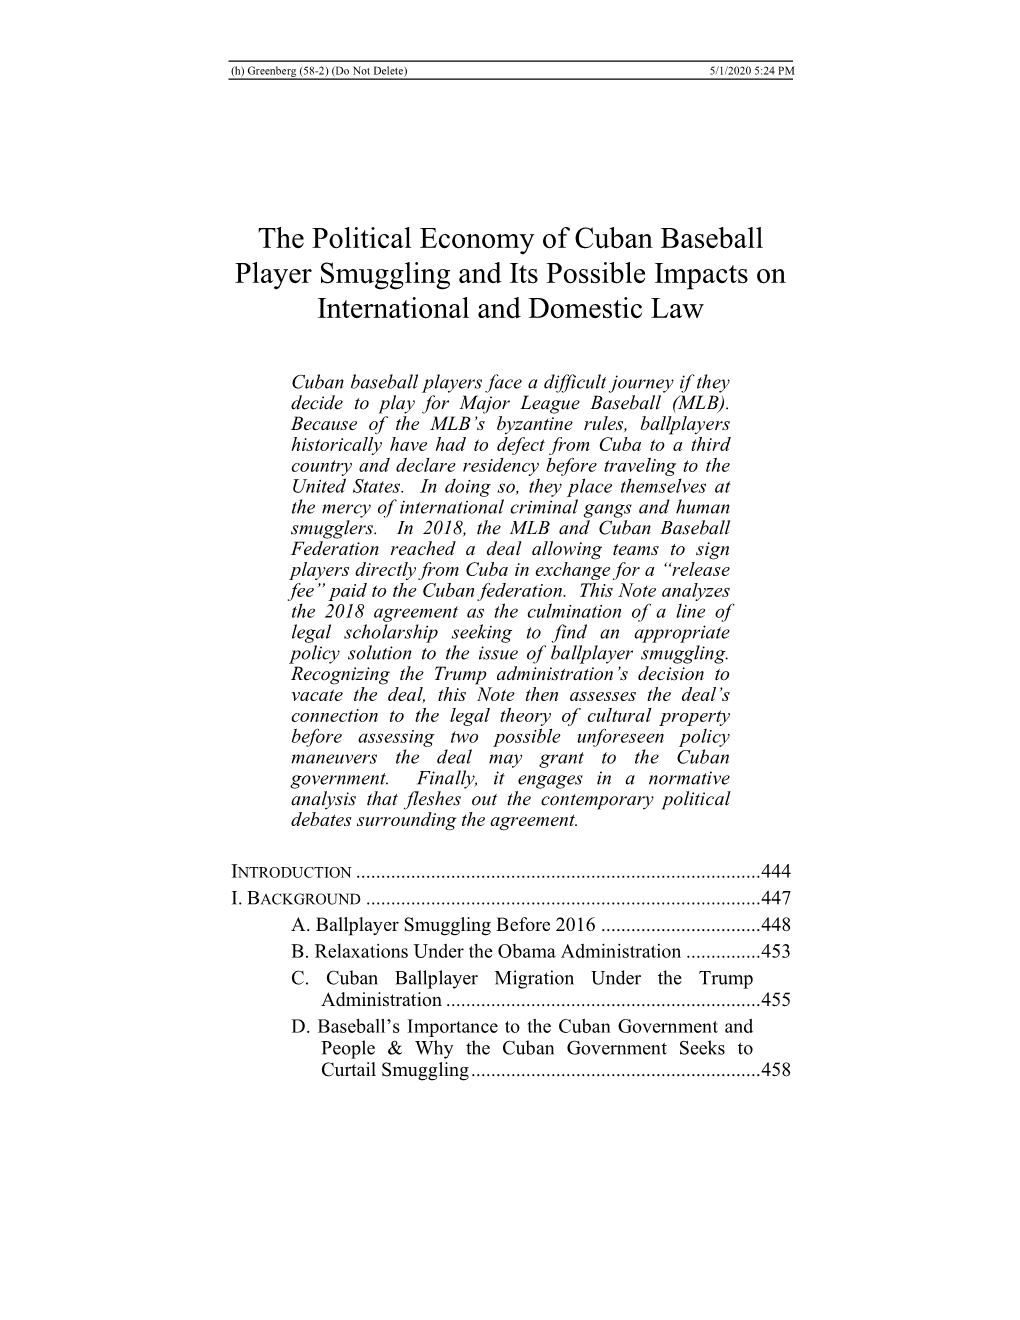 The Political Economy of Cuban Baseball Player Smuggling and Its Possible Impacts on International and Domestic Law